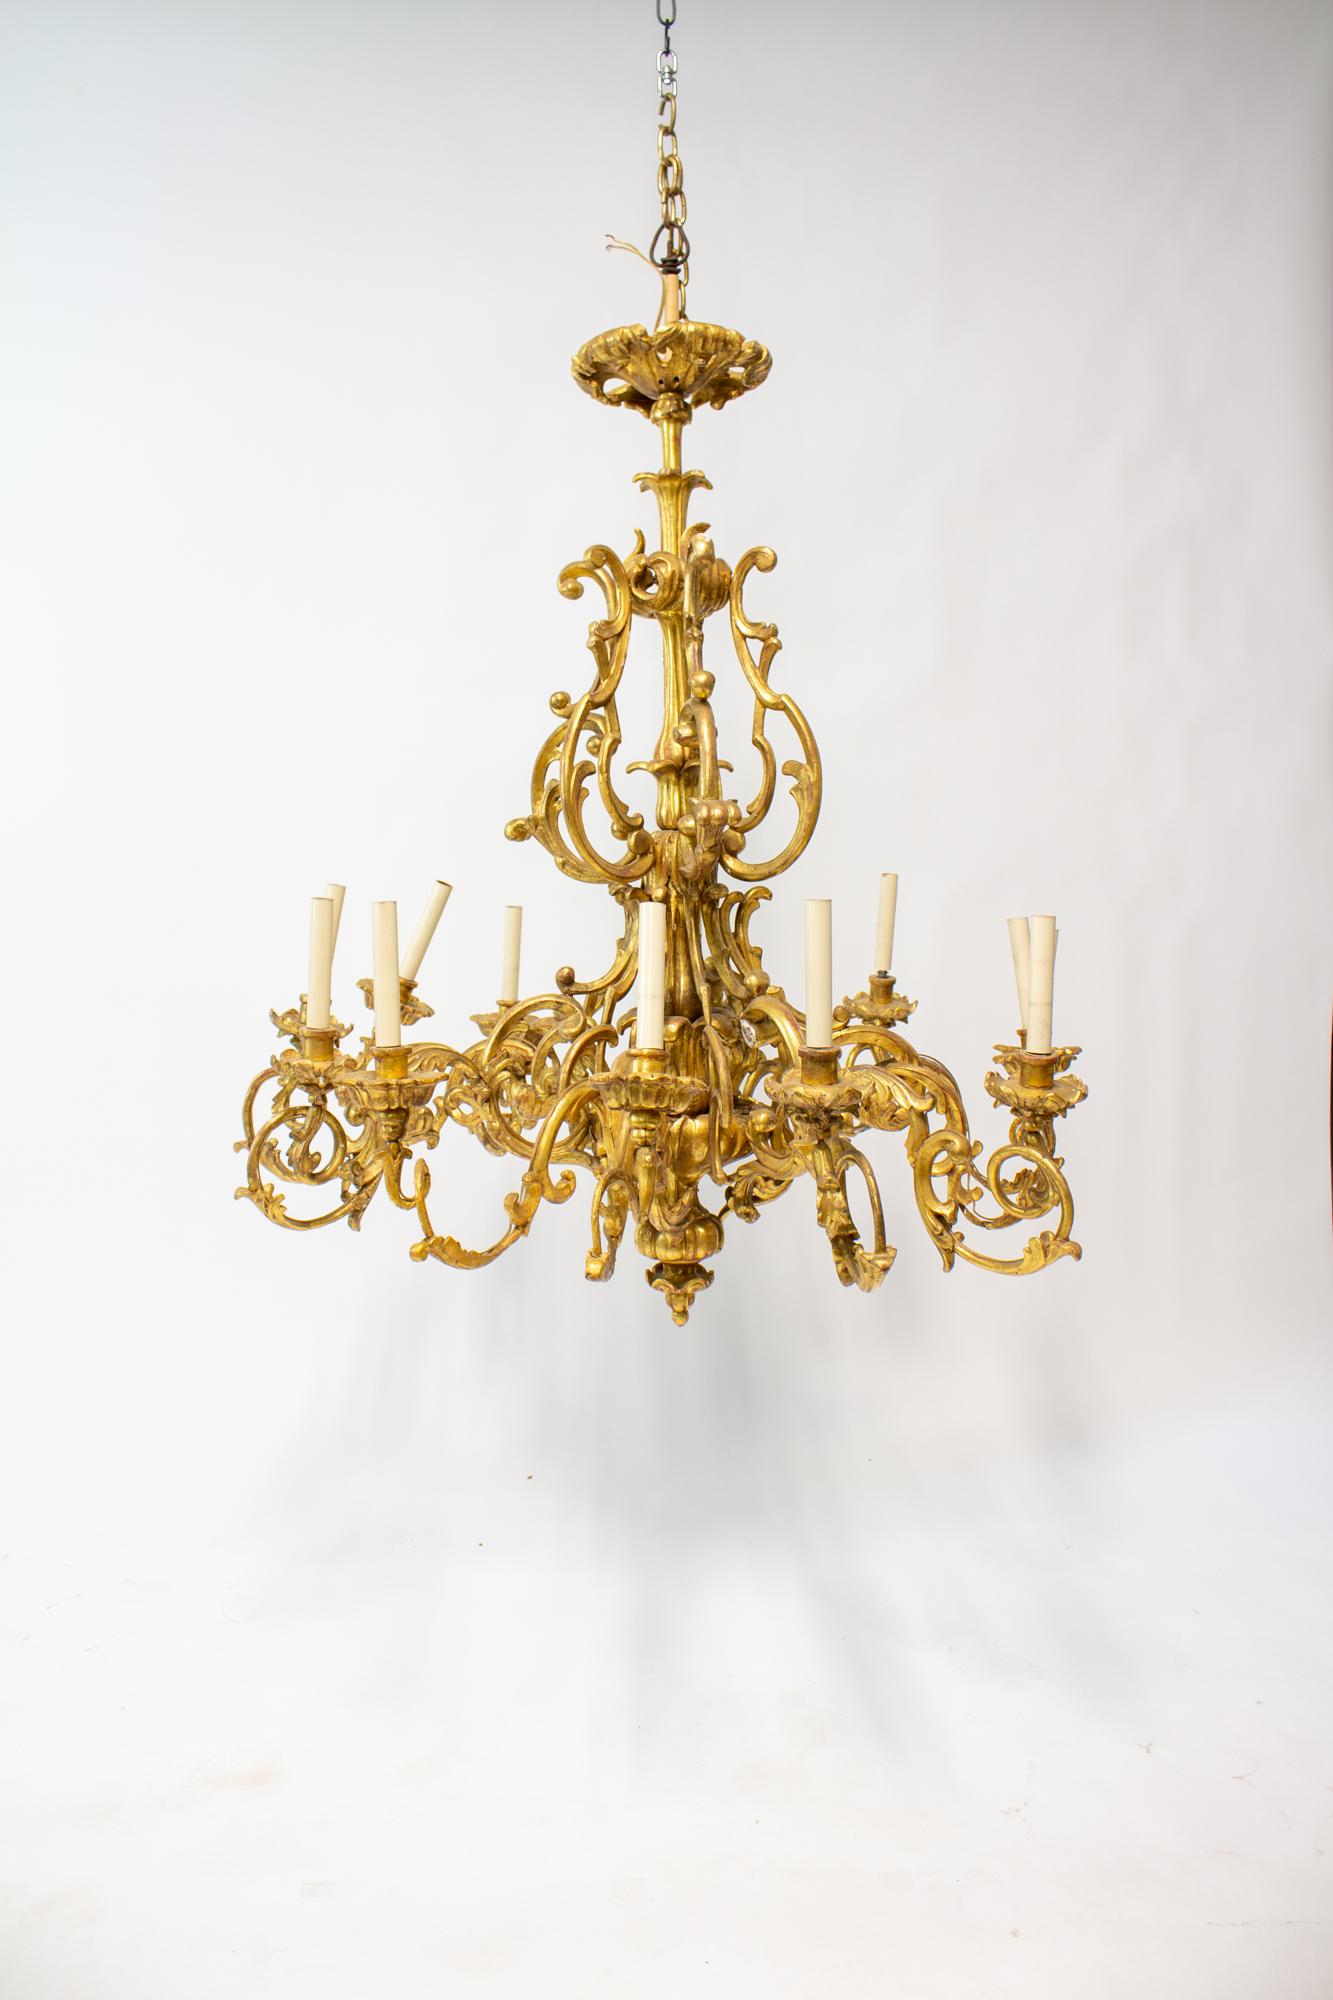 19th Century Rococo French Giltwood Chandeliers, a Pair For Sale 14